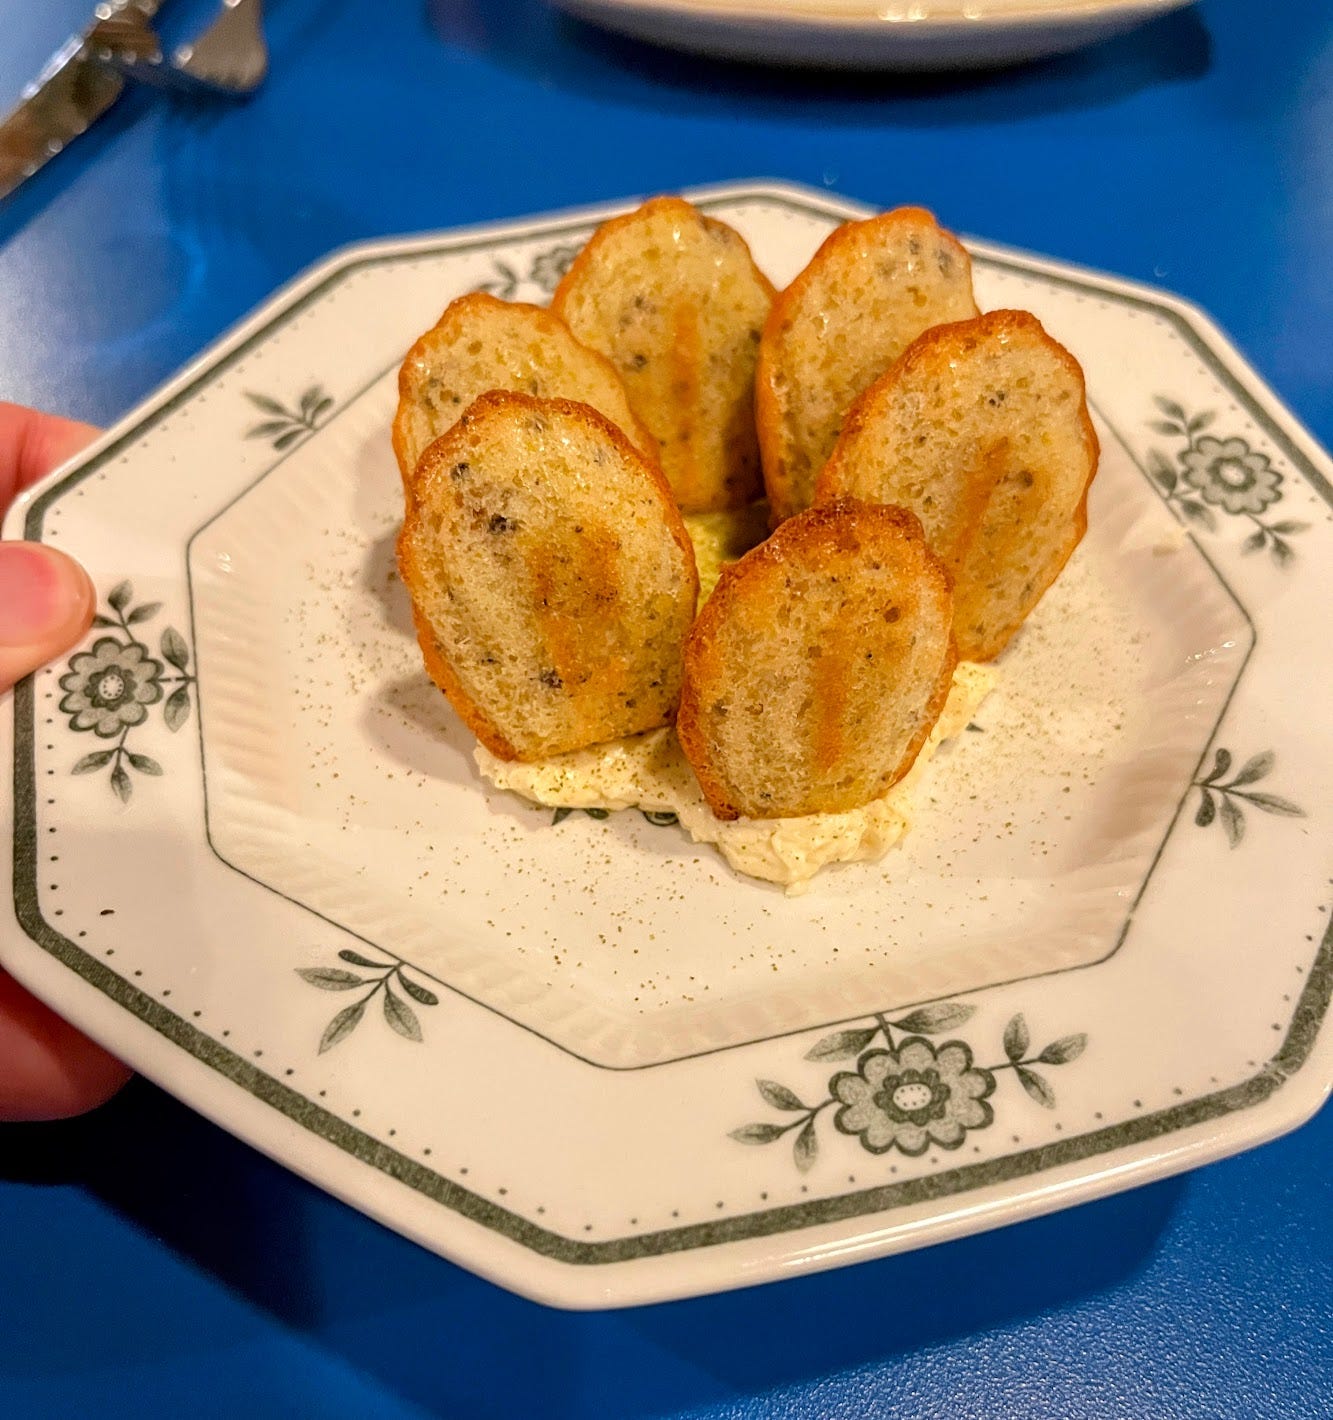 A plate of mini madeleines from the restaurant